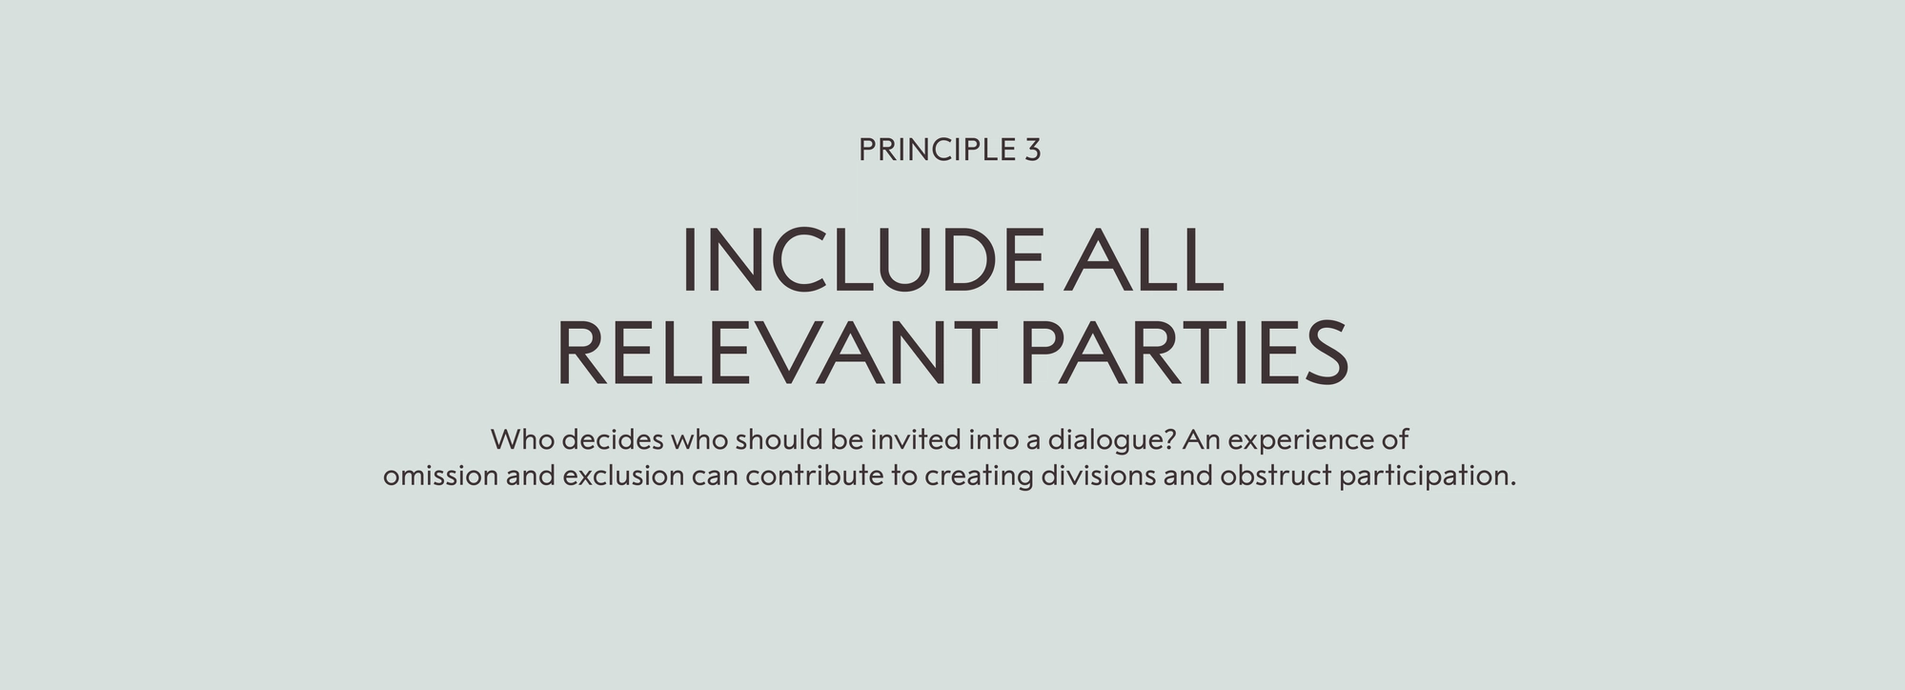 Principle 3: include all relevant parties